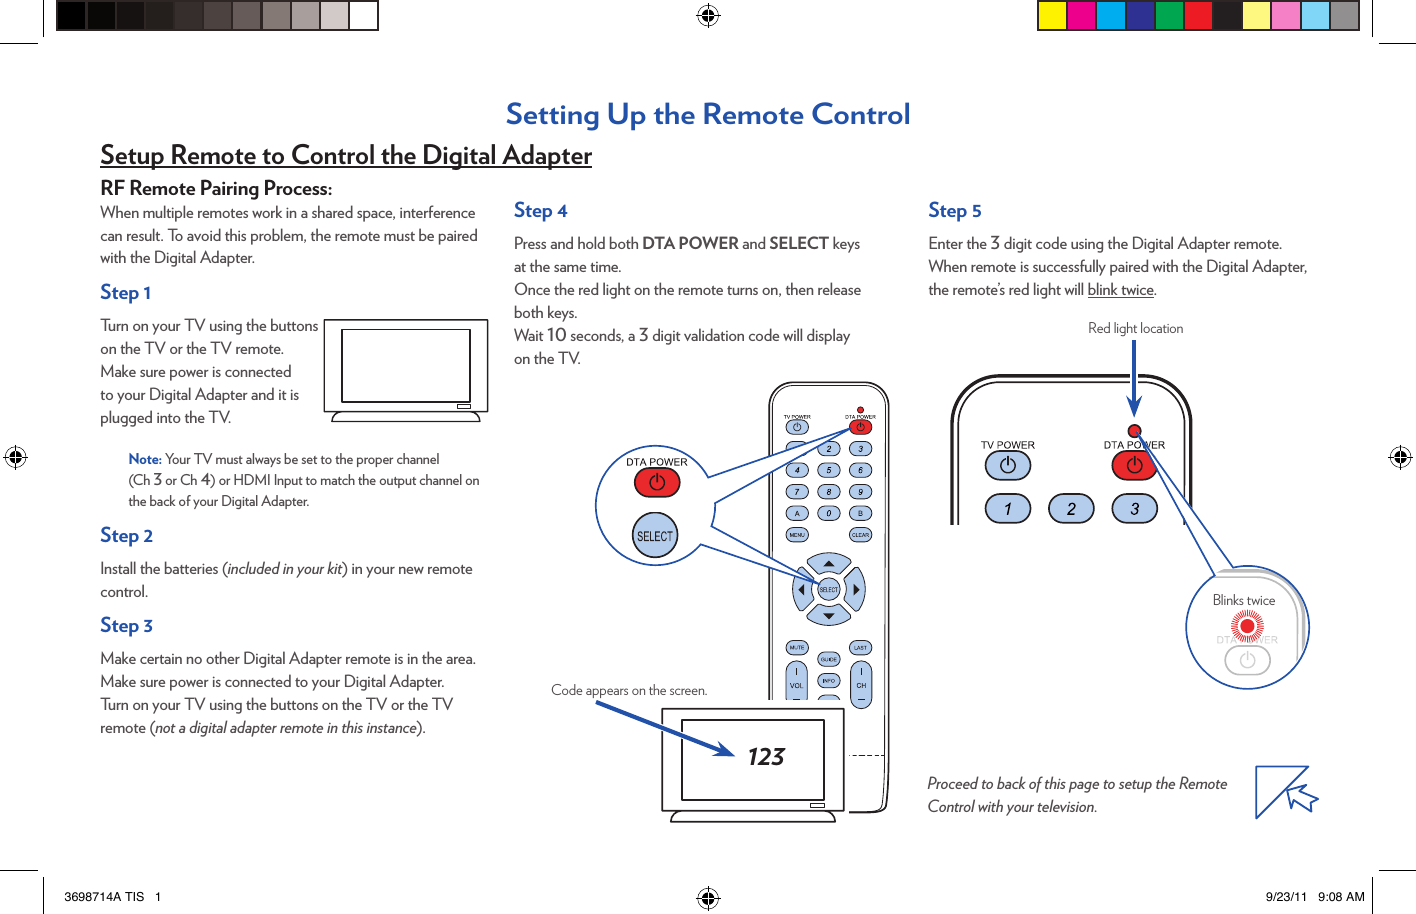 Red light locationRF Remote Pairing Process:When multiple remotes work in a shared space, interference can result. To avoid this problem, the remote must be paired with the Digital Adapter.Step 1Turn on your TV using the buttons on the TV or the TV remote.  Make sure power is connected to your Digital Adapter and it is plugged into the TV.Note: Your TV must always be set to the proper channel  (Ch 3 or Ch 4) or HDMI Input to match the output channel on the back of your Digital Adapter.Step 2Install the batteries (included in your kit) in your new remote control.Step 3Make certain no other Digital Adapter remote is in the area.Make sure power is connected to your Digital Adapter.  Turn on your TV using the buttons on the TV or the TV remote (not a digital adapter remote in this instance).Setting Up the Remote ControlCode appears on the screen.123Step 4Press and hold both DTA POWER and SELECT keys  at the same time.Once the red light on the remote turns on, then release  both keys.Wait 10 seconds, a 3 digit validation code will display  on the TV.Step 5Enter the 3 digit code using the Digital Adapter remote.When remote is successfully paired with the Digital Adapter, the remote’s red light will blink twice.Proceed to back of this page to setup the Remote Control with your television. Setup Remote to Control the Digital AdapterBlinks twice3698714A TIS   1 9/23/11   9:08 AM